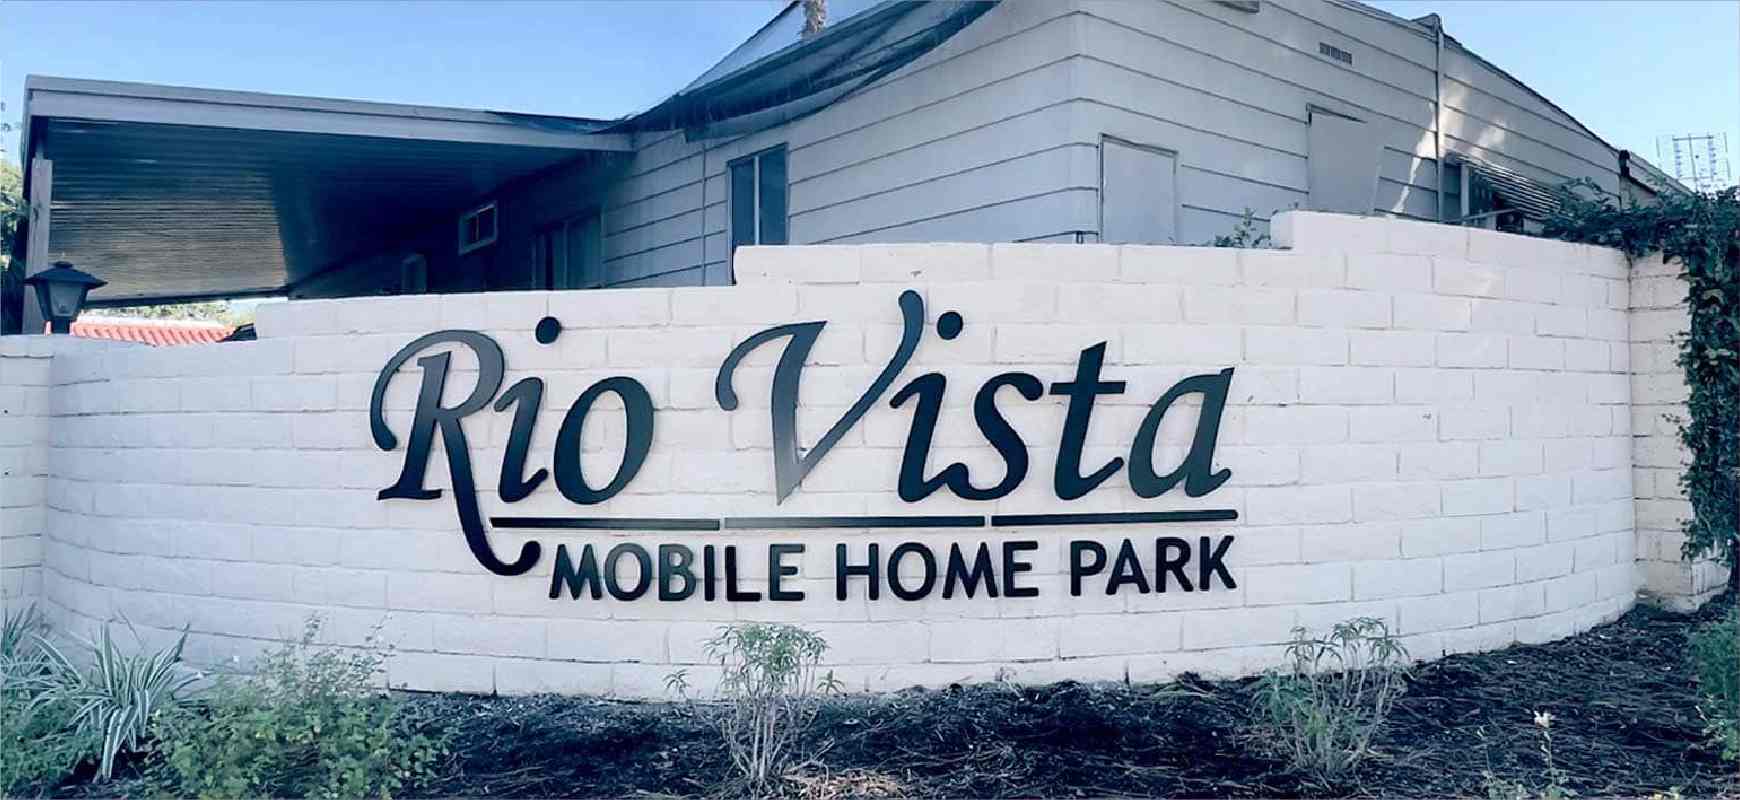 Rio Vista large letter signage in black made of aluminum for exterior wall branding